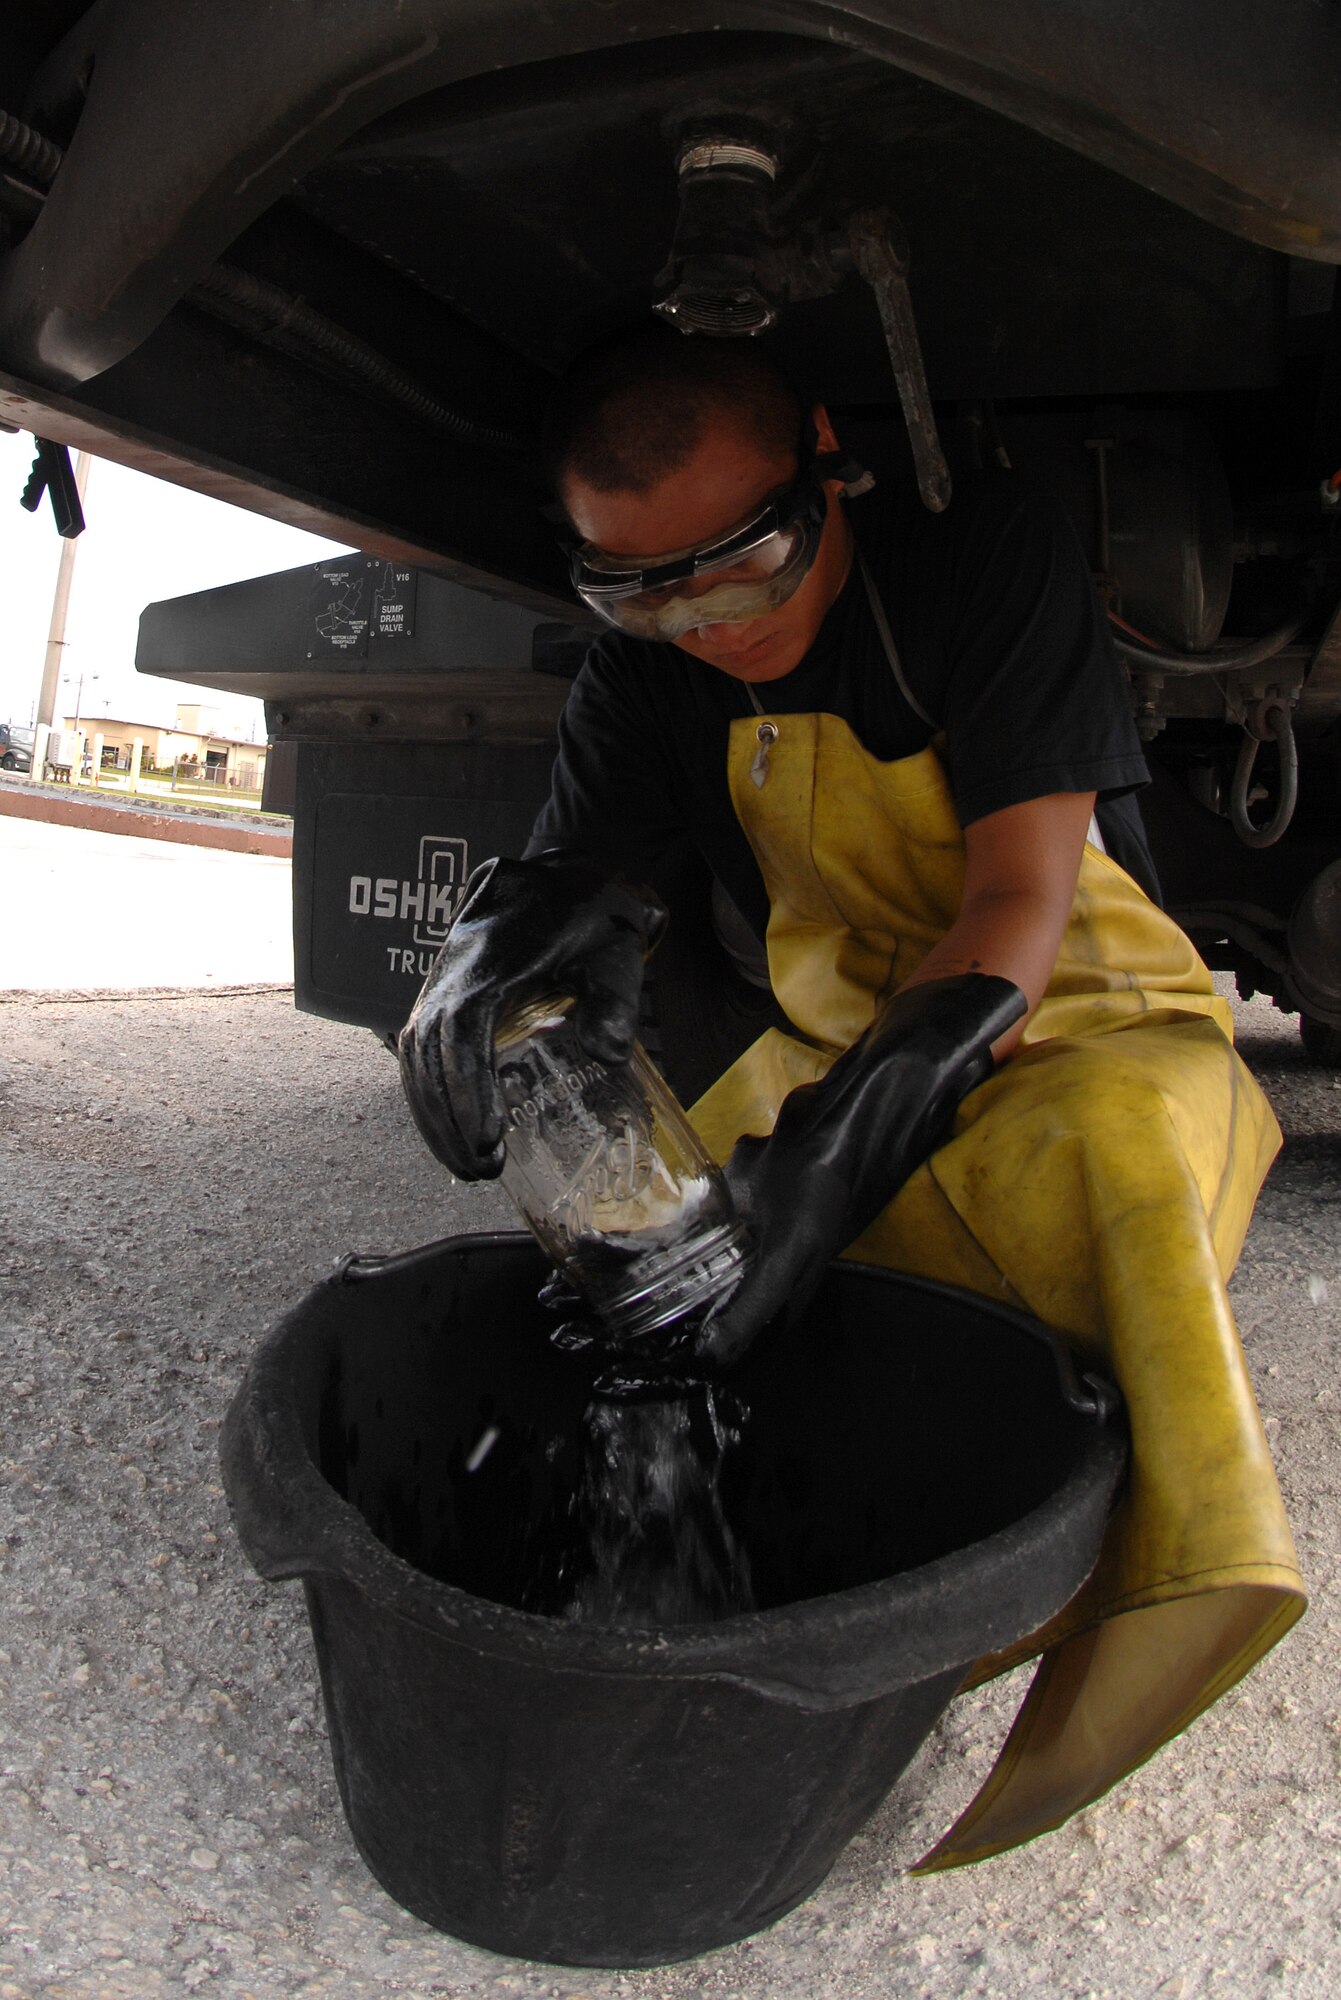 Airman 1st Class John Nguyen drains a quart of jet fuel at a vehicle check station here July 14. A quart of fuel was drained and visually checked for sediments and water before allowing the R-12 to deliver fuel to the flight line. The main purpose for this check is to insure that clean, dry fuel is pumped into the aircrafts. (U.S. Air Force photo by Airman 1st Class Courtney Witt)